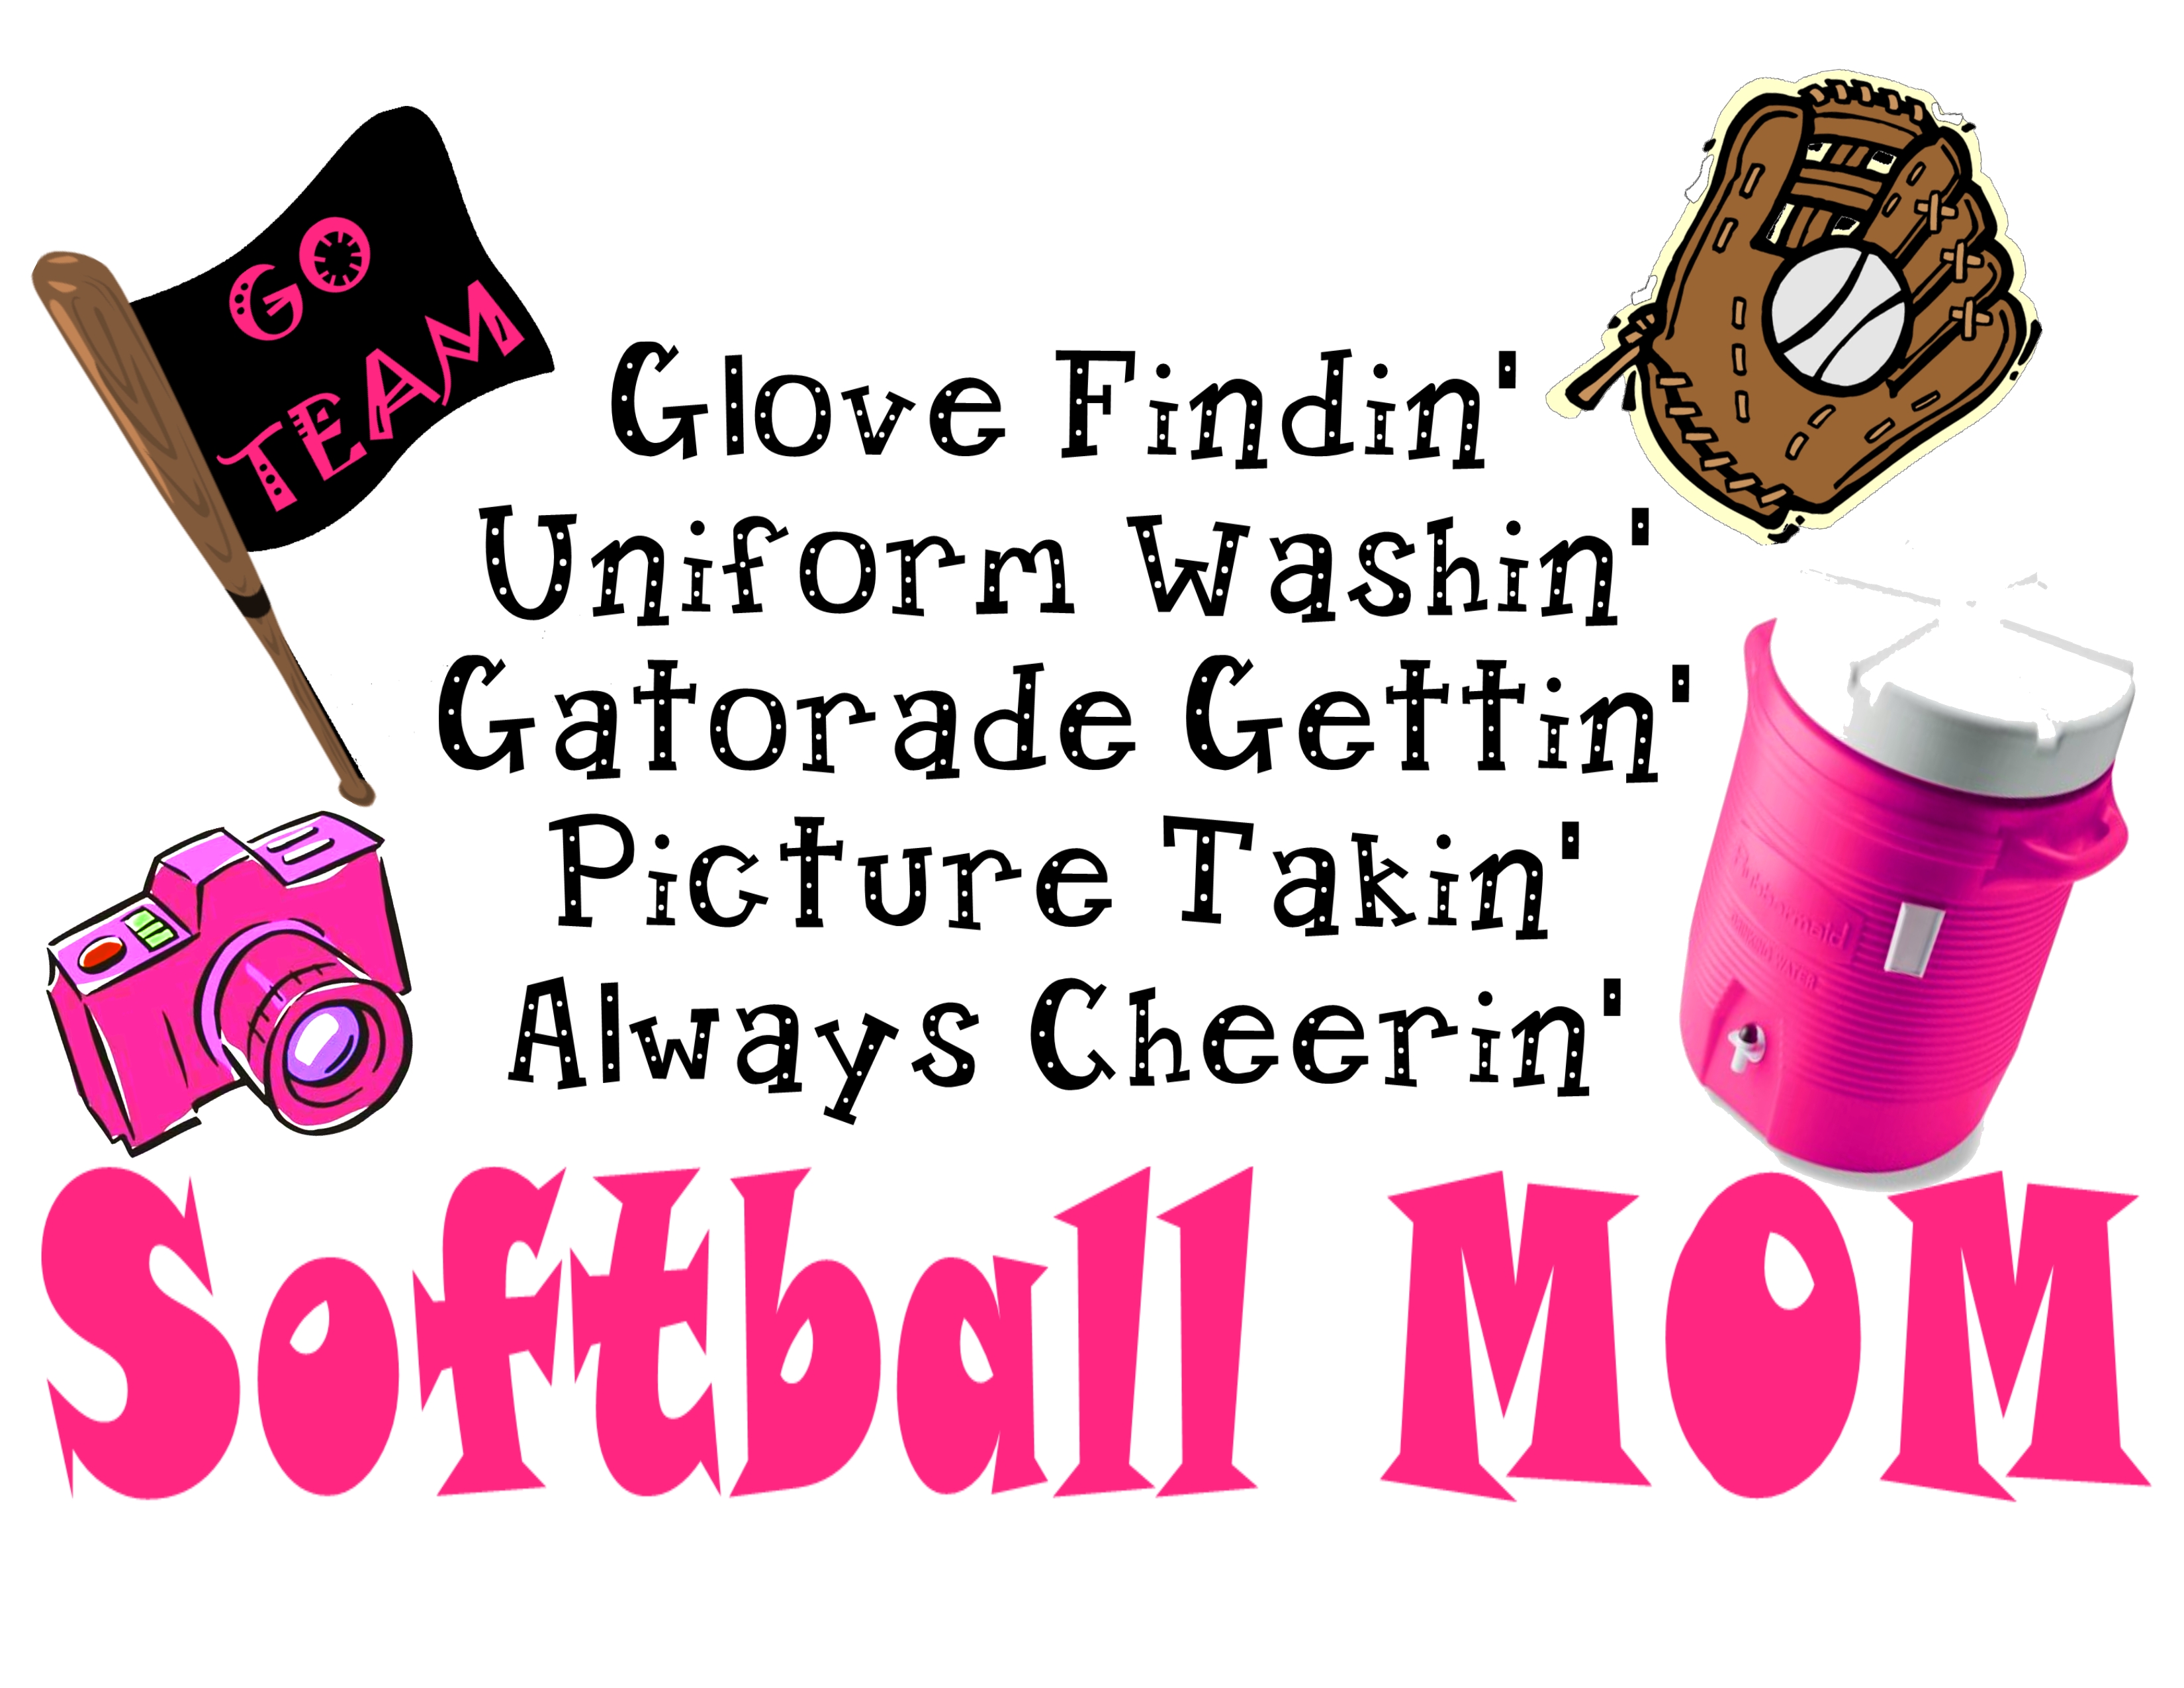 Ball Mom Page   Free Images At Clker Com   Vector Clip Art Online